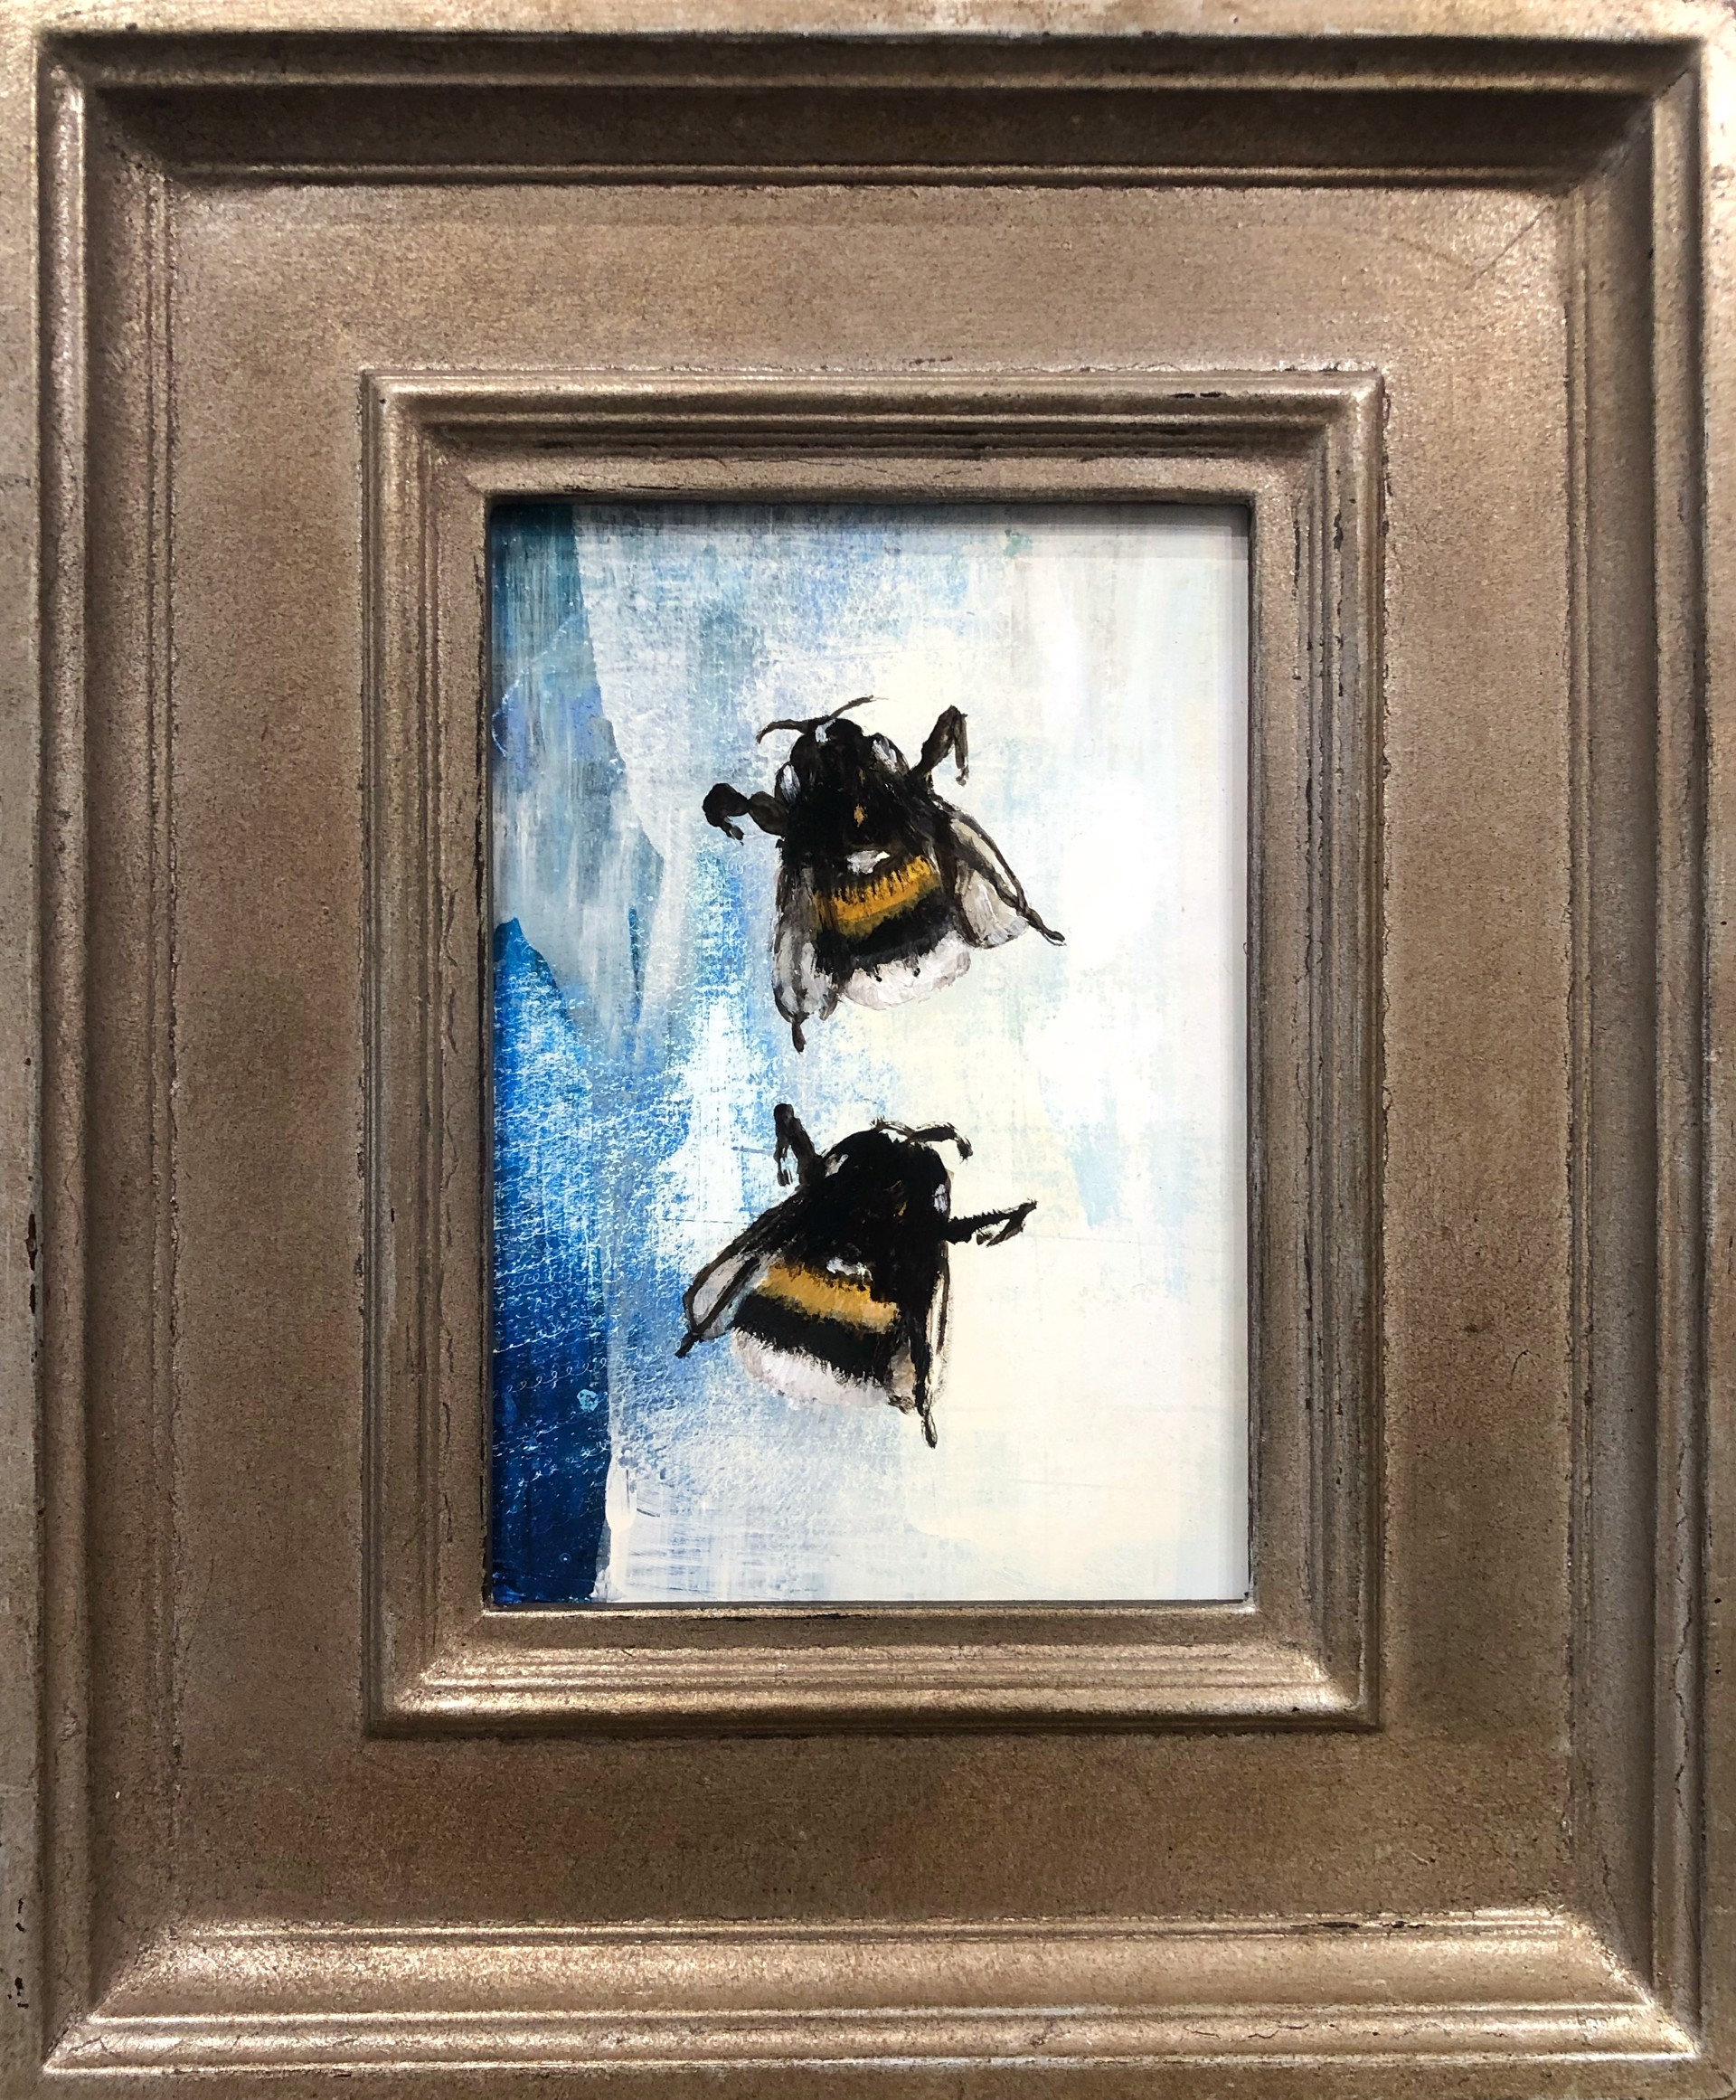 Original Oil Painting Of Two Bumble Bees On A Abstract Blue NA White Background With A Warm Silver Frame By Jenna Von Benedikts